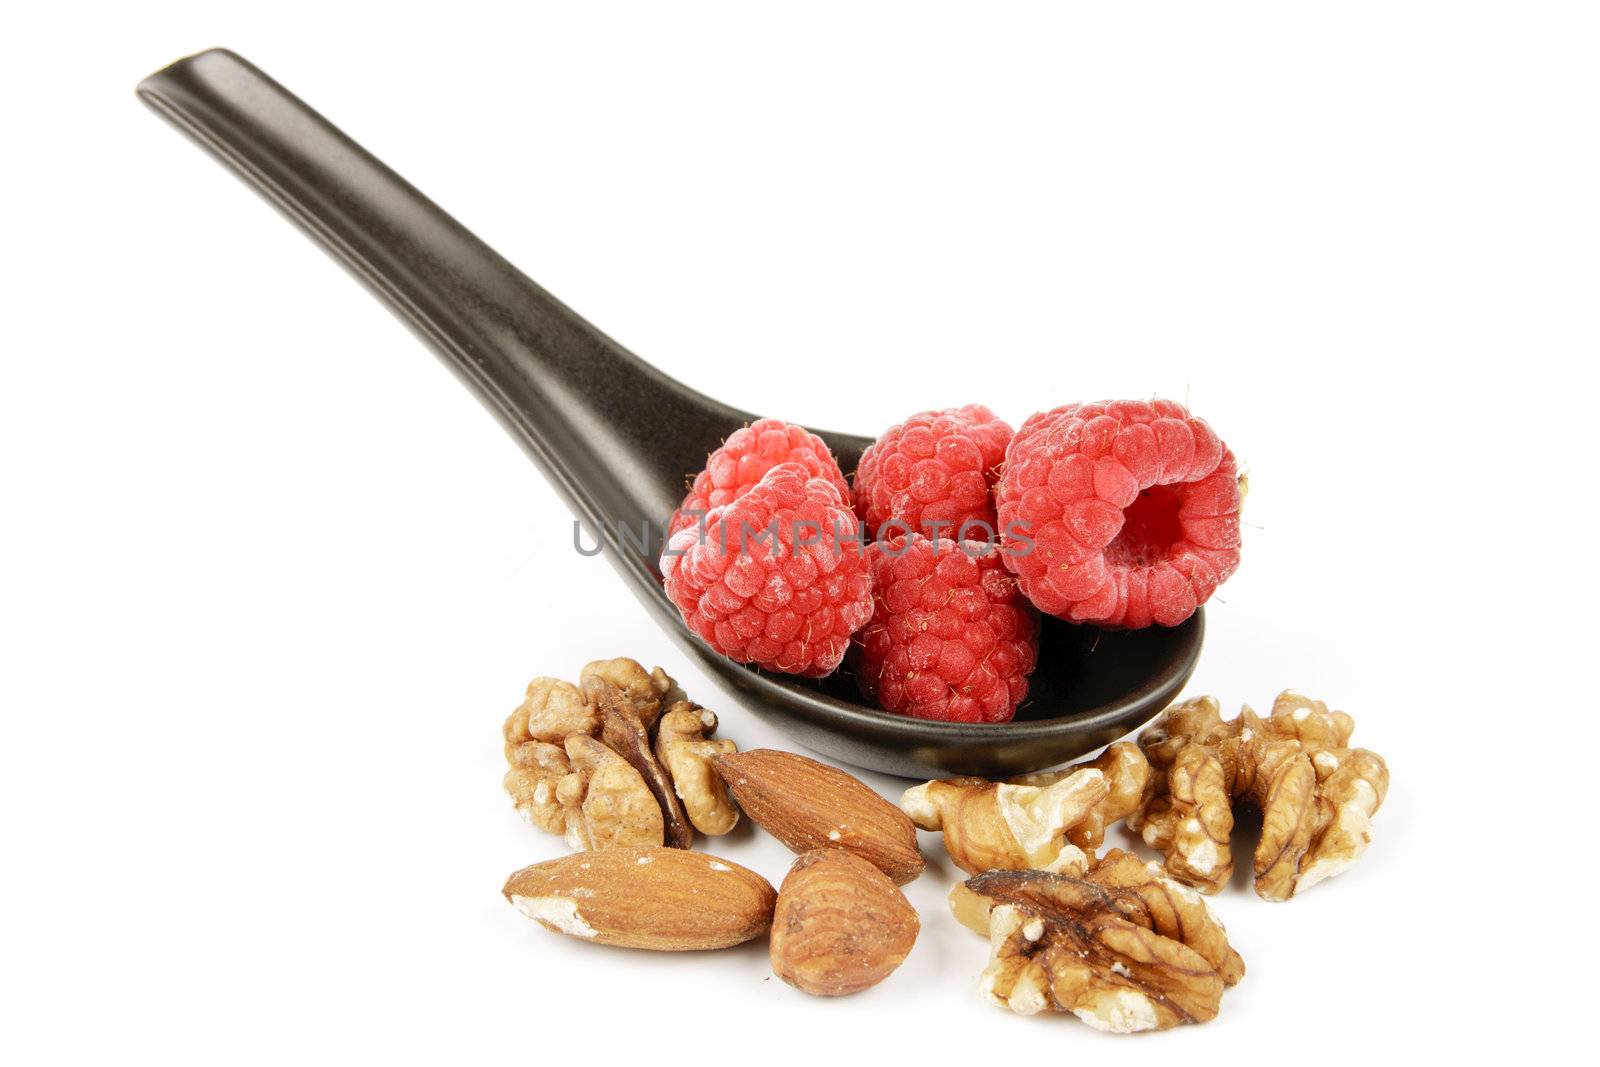 Red ripe frozen raspberries on a small black spoon with mixed nuts on a reflective white background